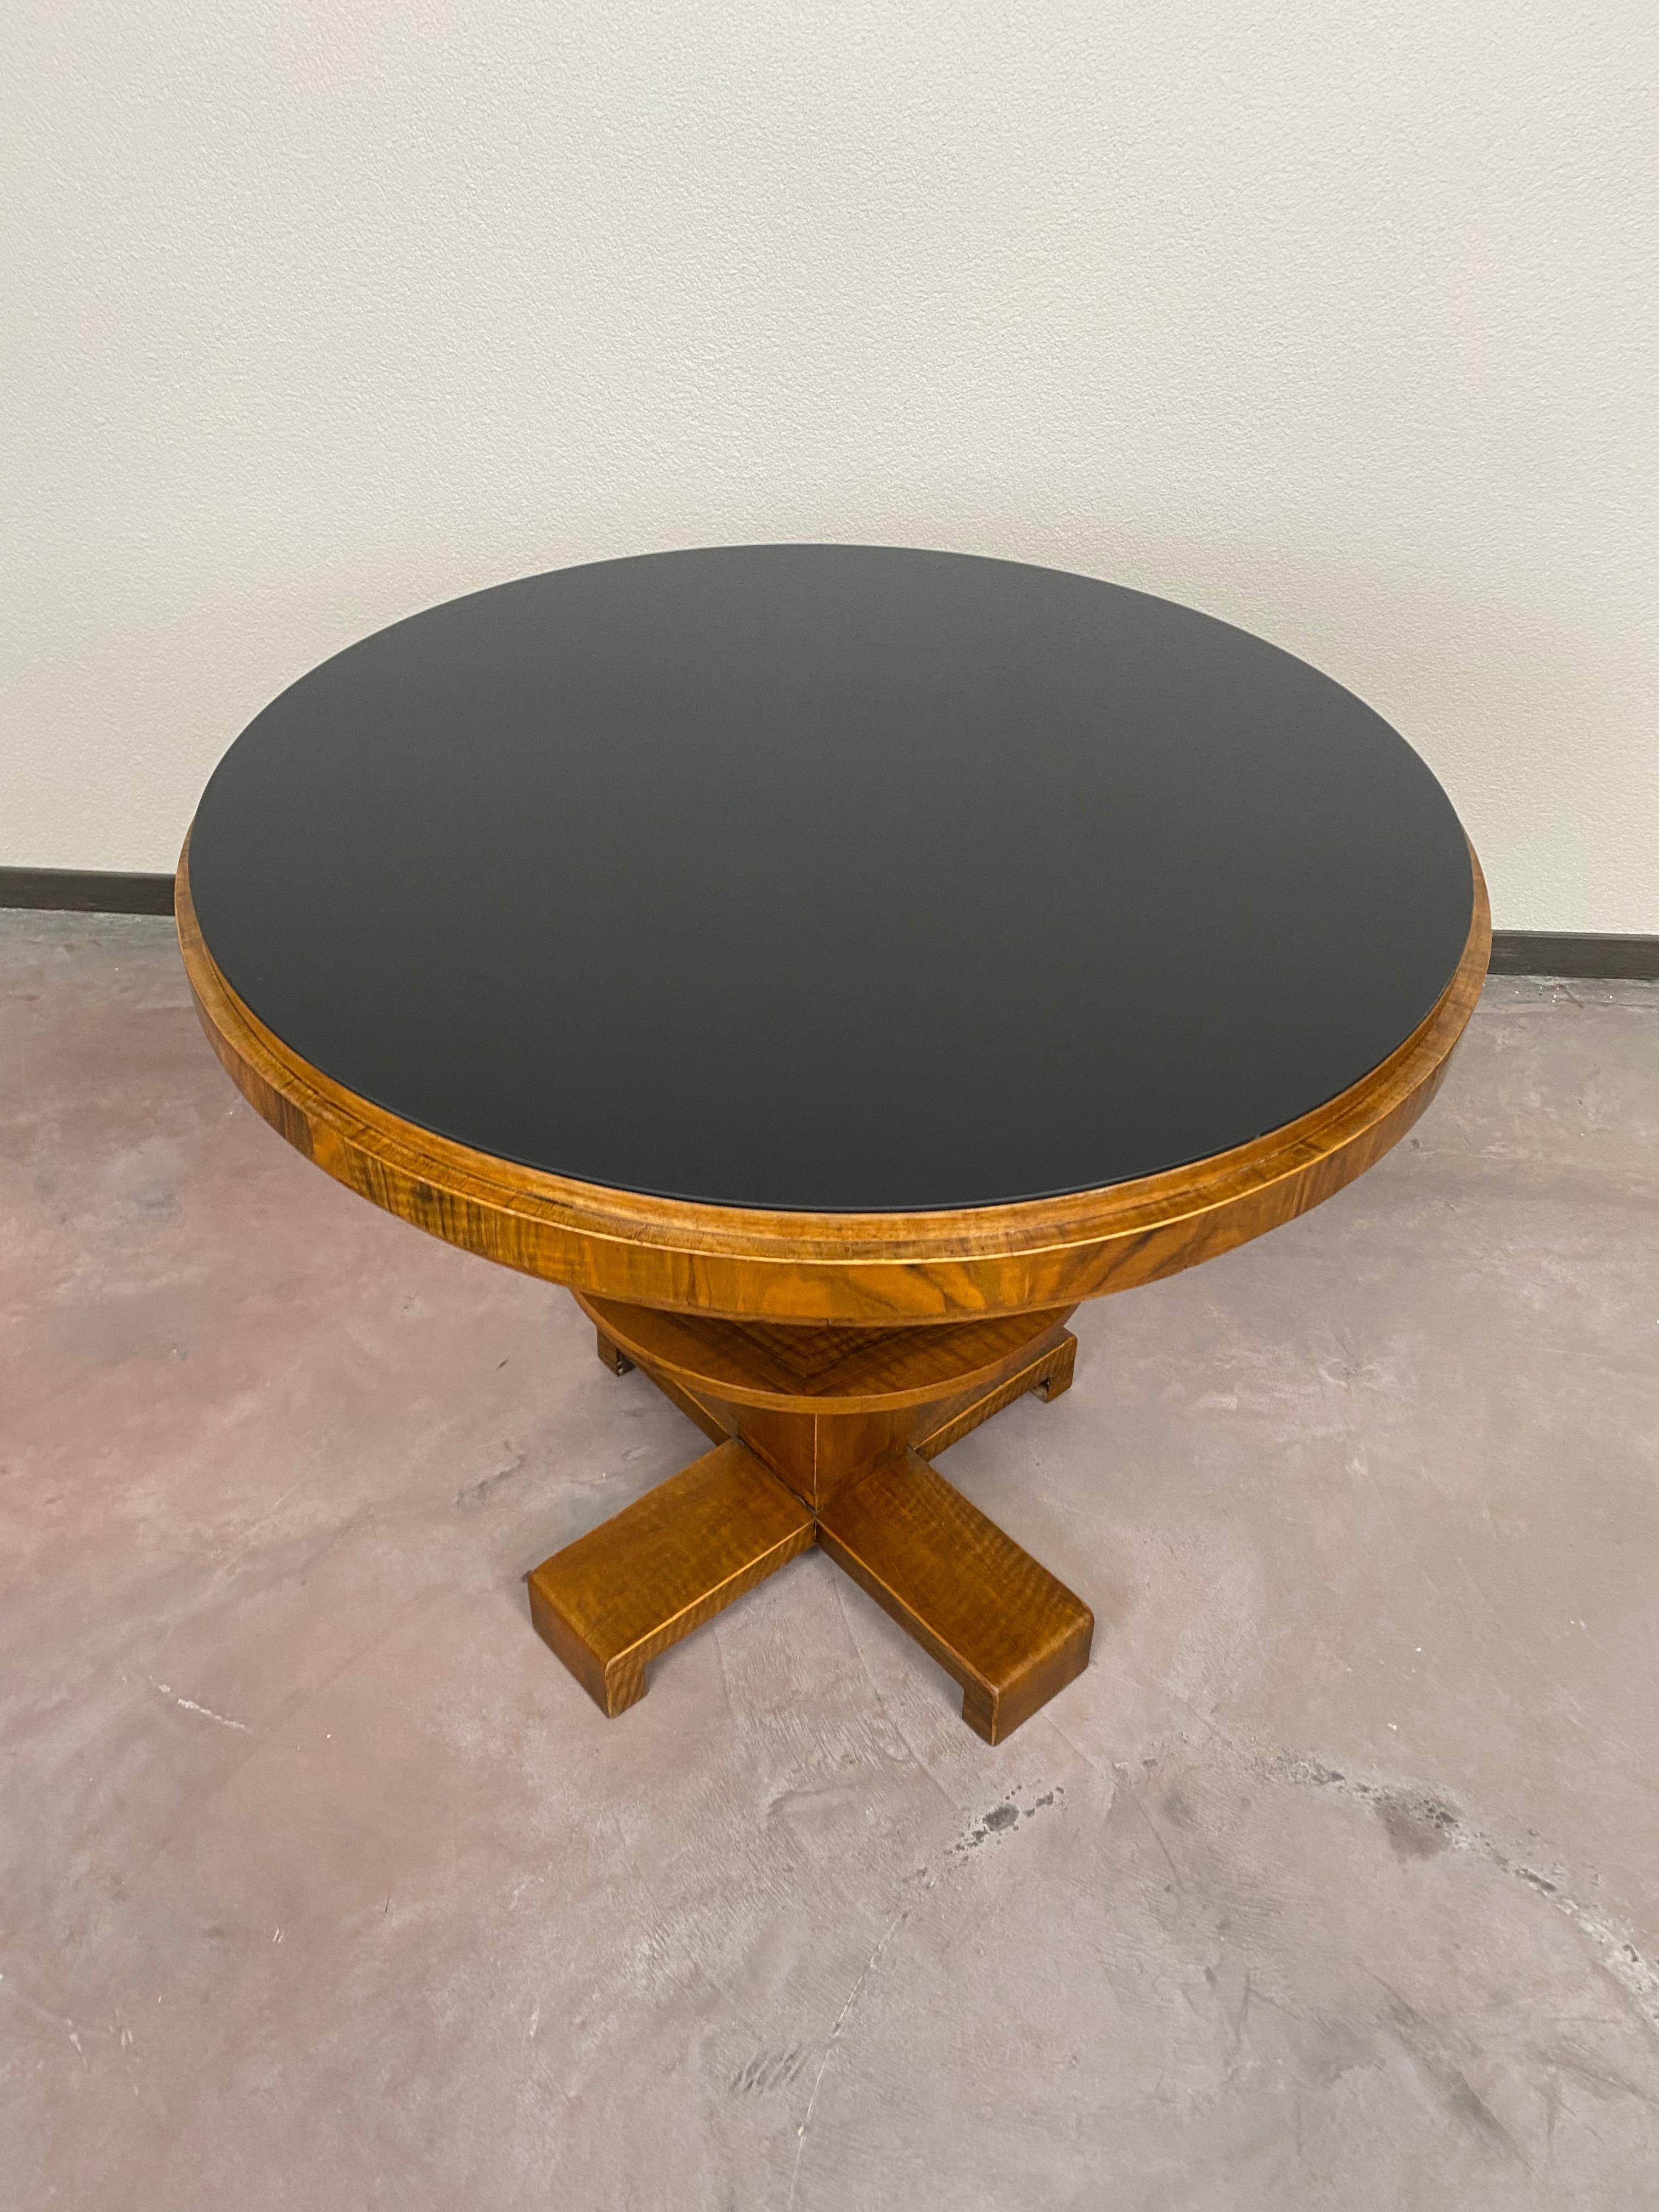 Slovak Art Deco Card Table with Black Glass Top For Sale